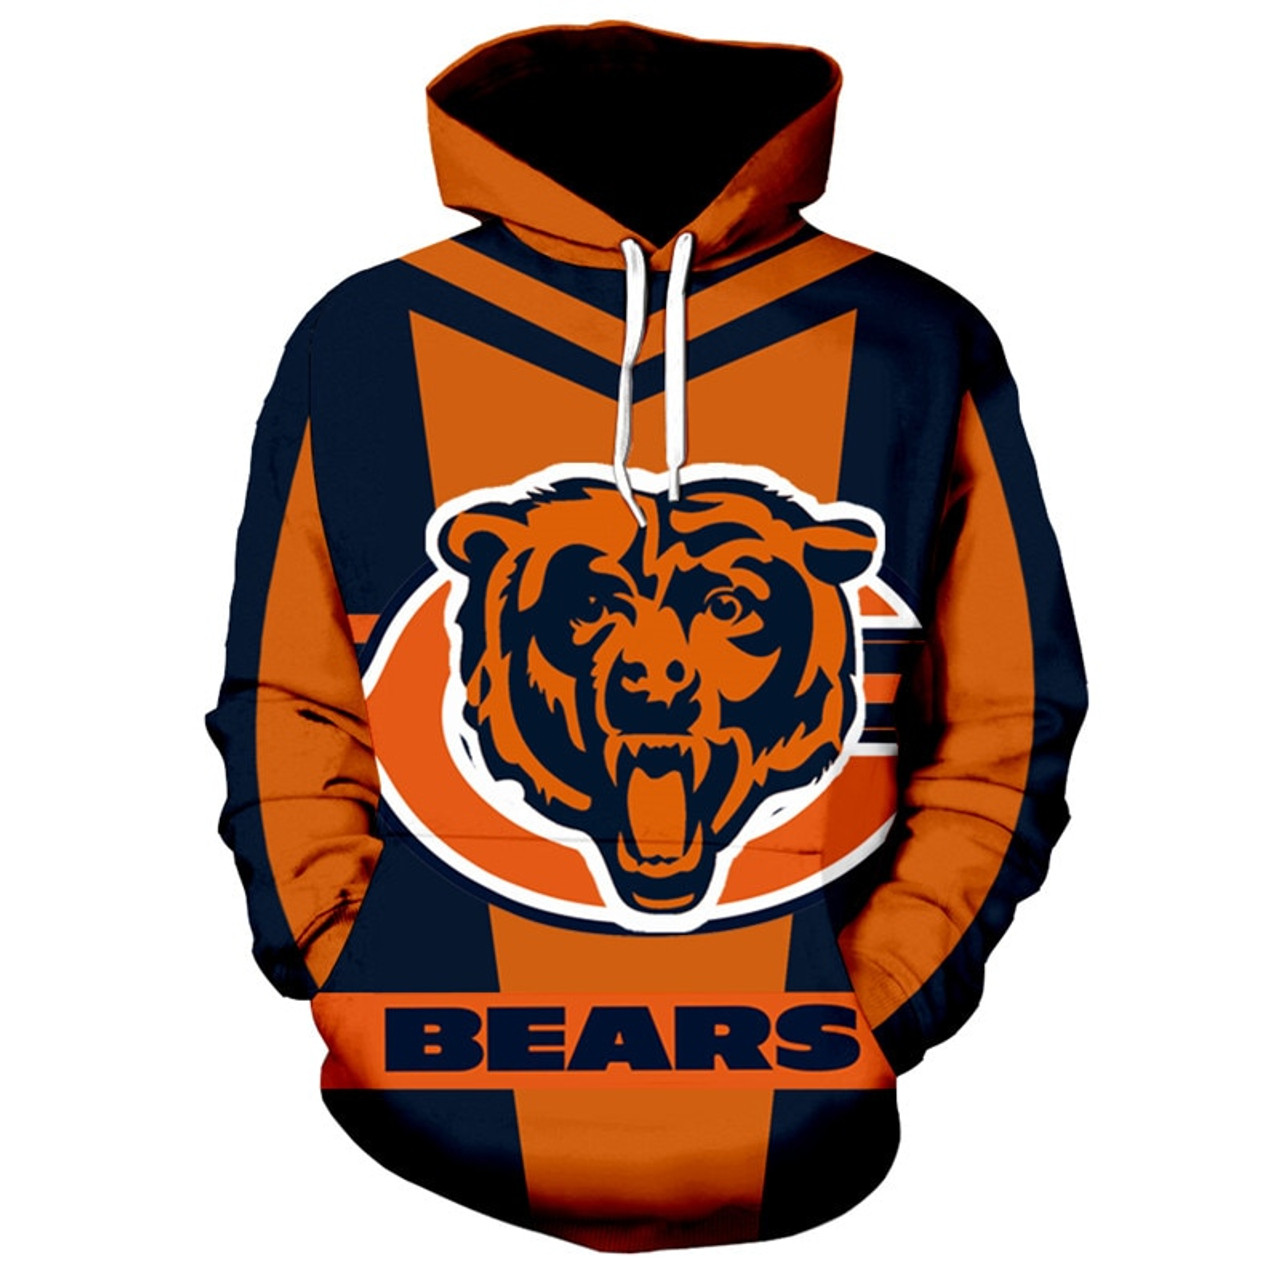 chicago bears pullover hoodie